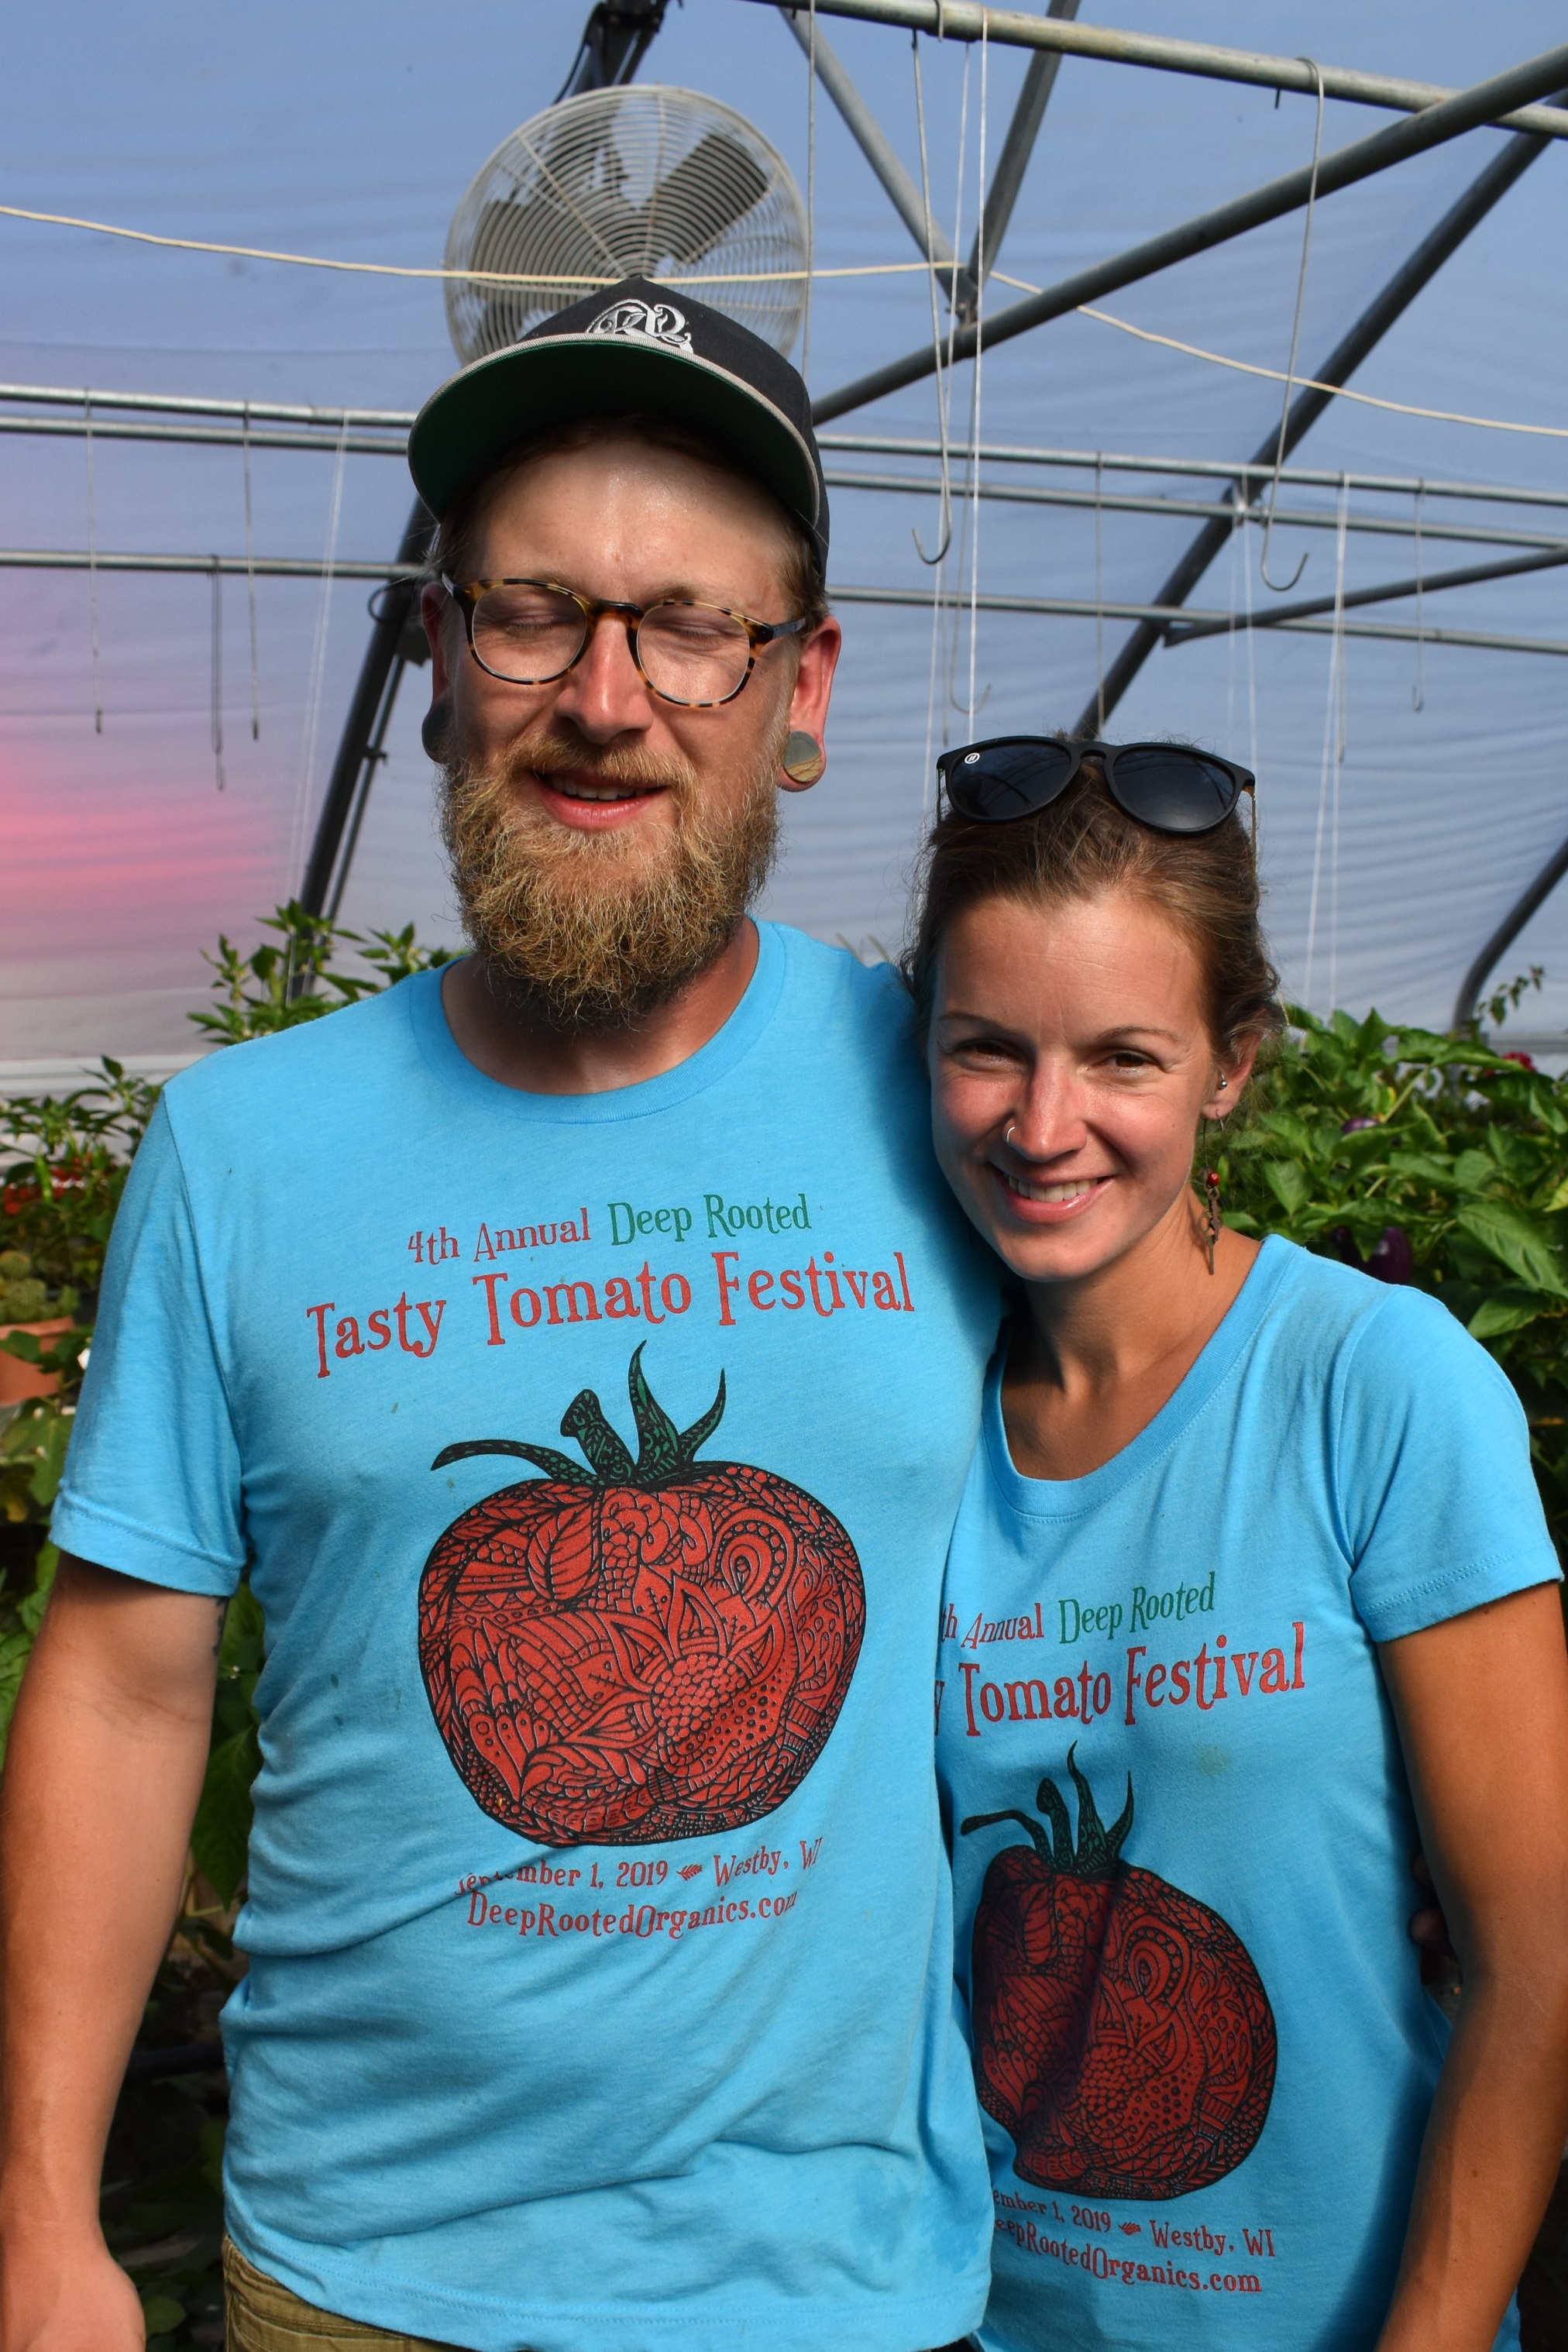  Owners of Deep Rooted Jimmy Fackert and Tiffany Cade  